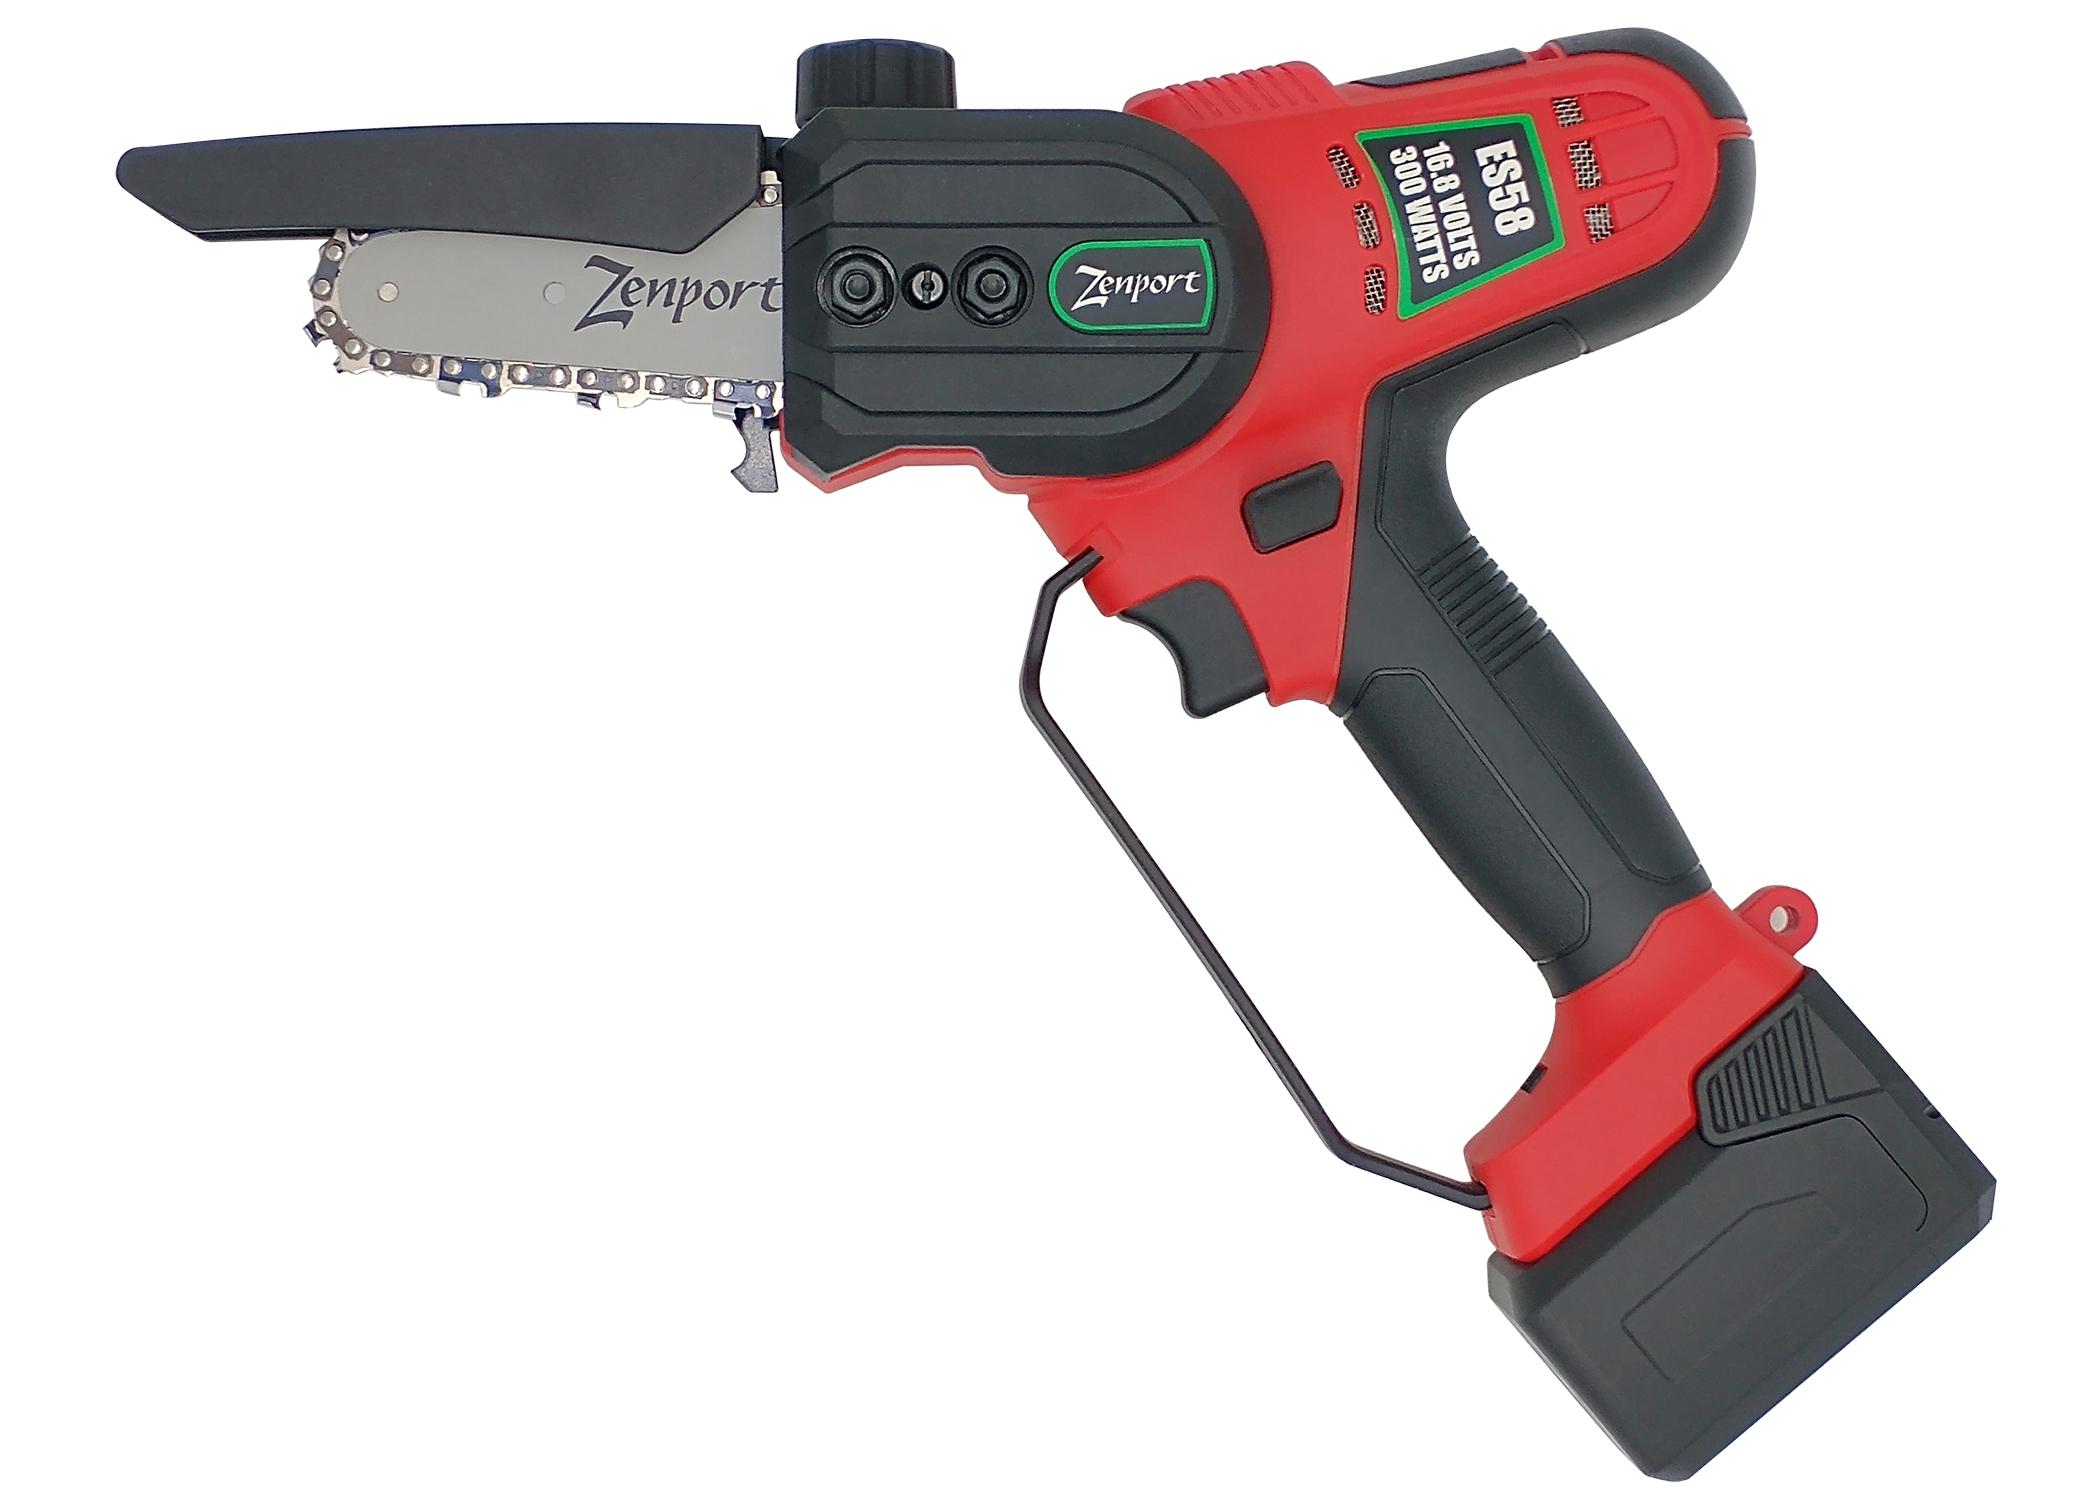 Zenport Chainsaw ES58 4-Inch, 2.3-Inch Cut, 16.8-Volt Battery, Cordless, FREE SHIPPING